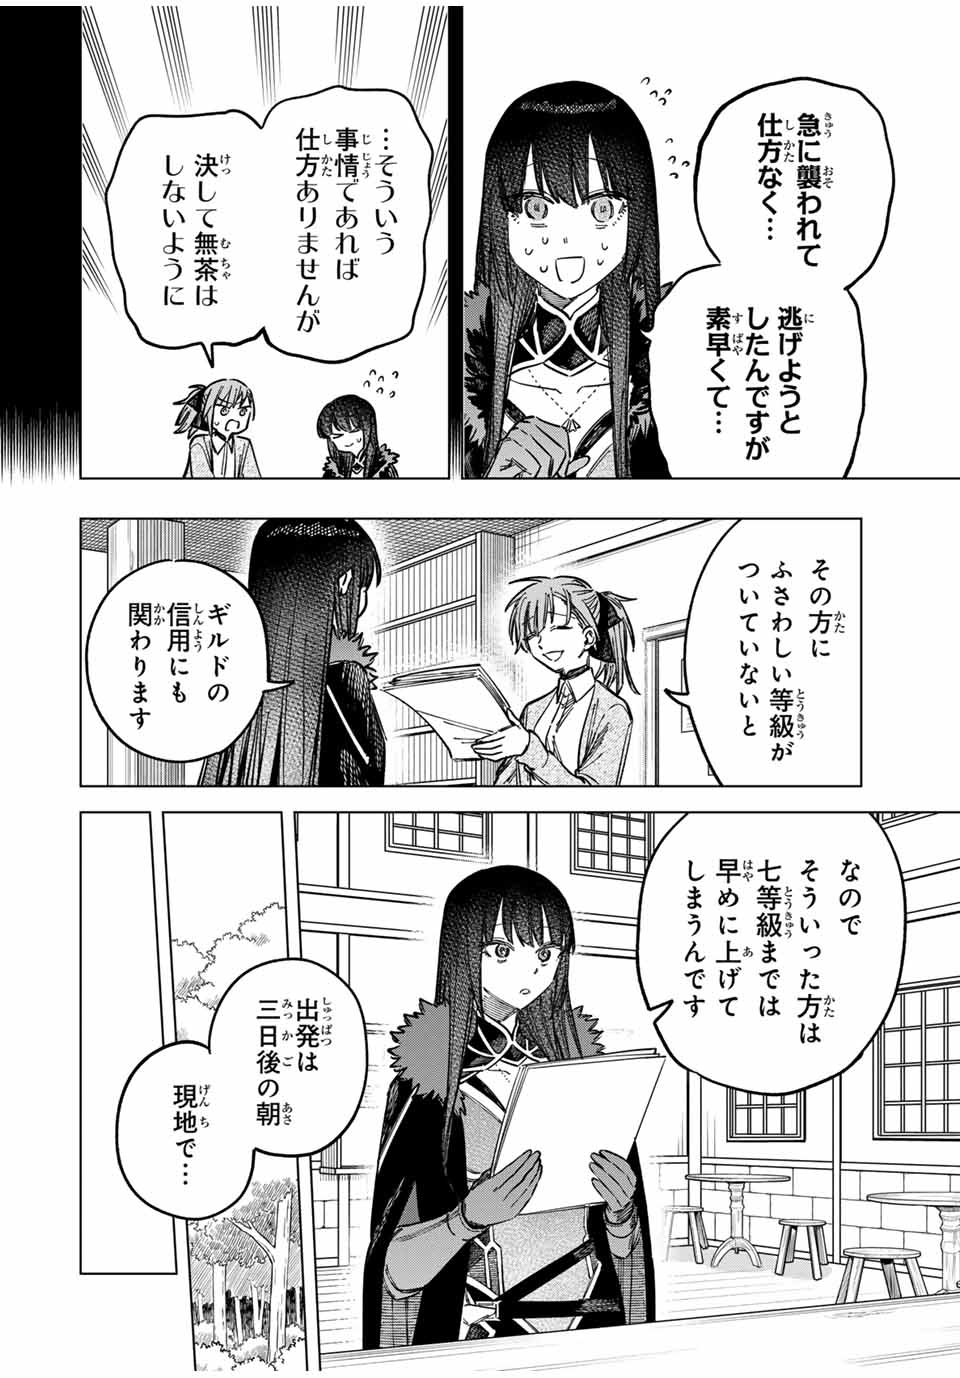 Witch and Mercenary 魔女と傭兵 第10話 - Page 6